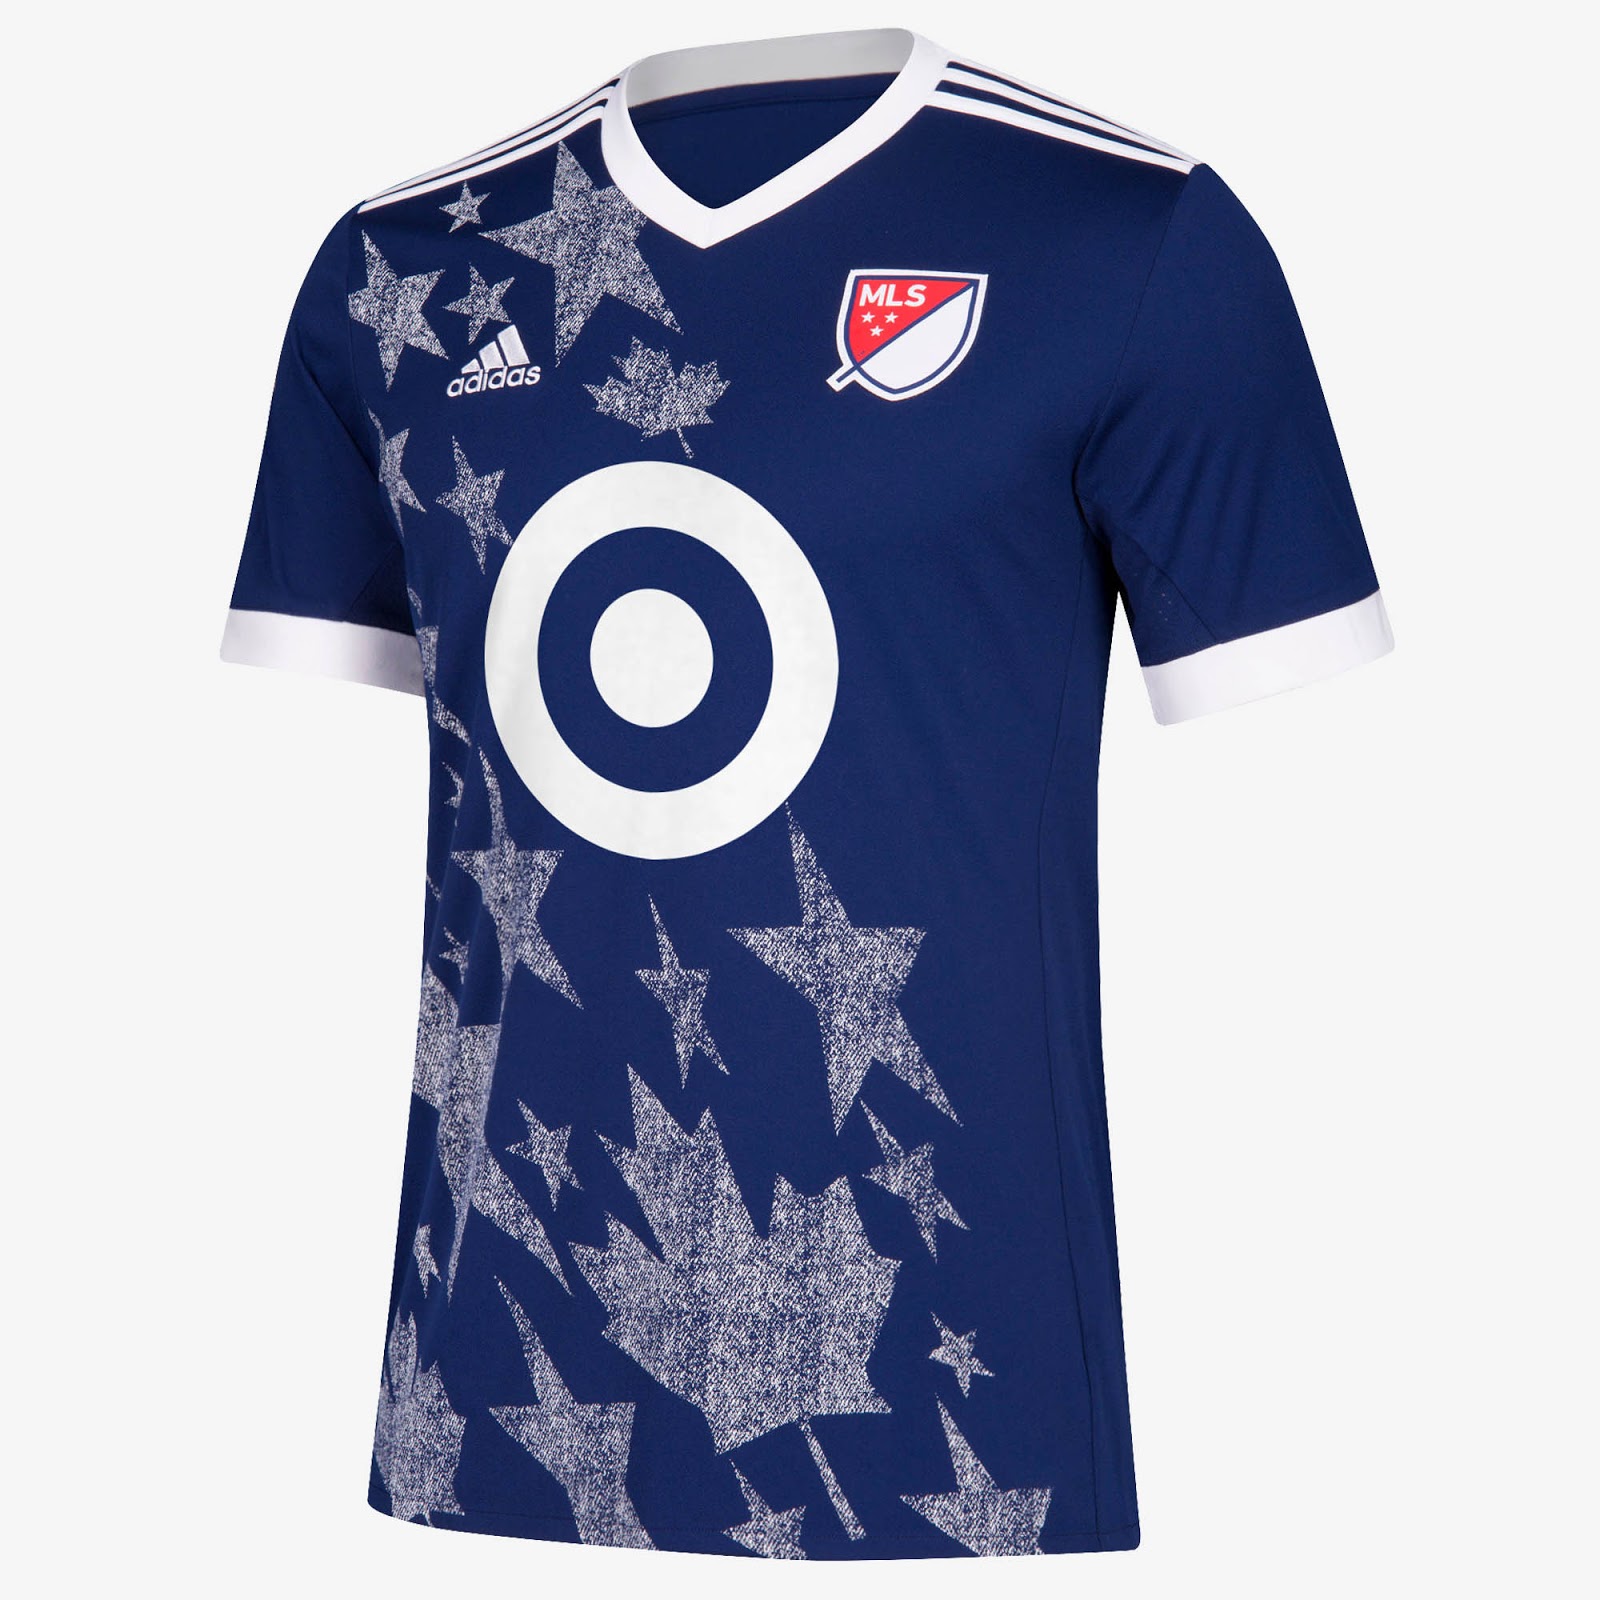 Ready For The Real Madrid Clash  Awesome MLS 2017 All-Star Jersey Released  - Footy Headlines